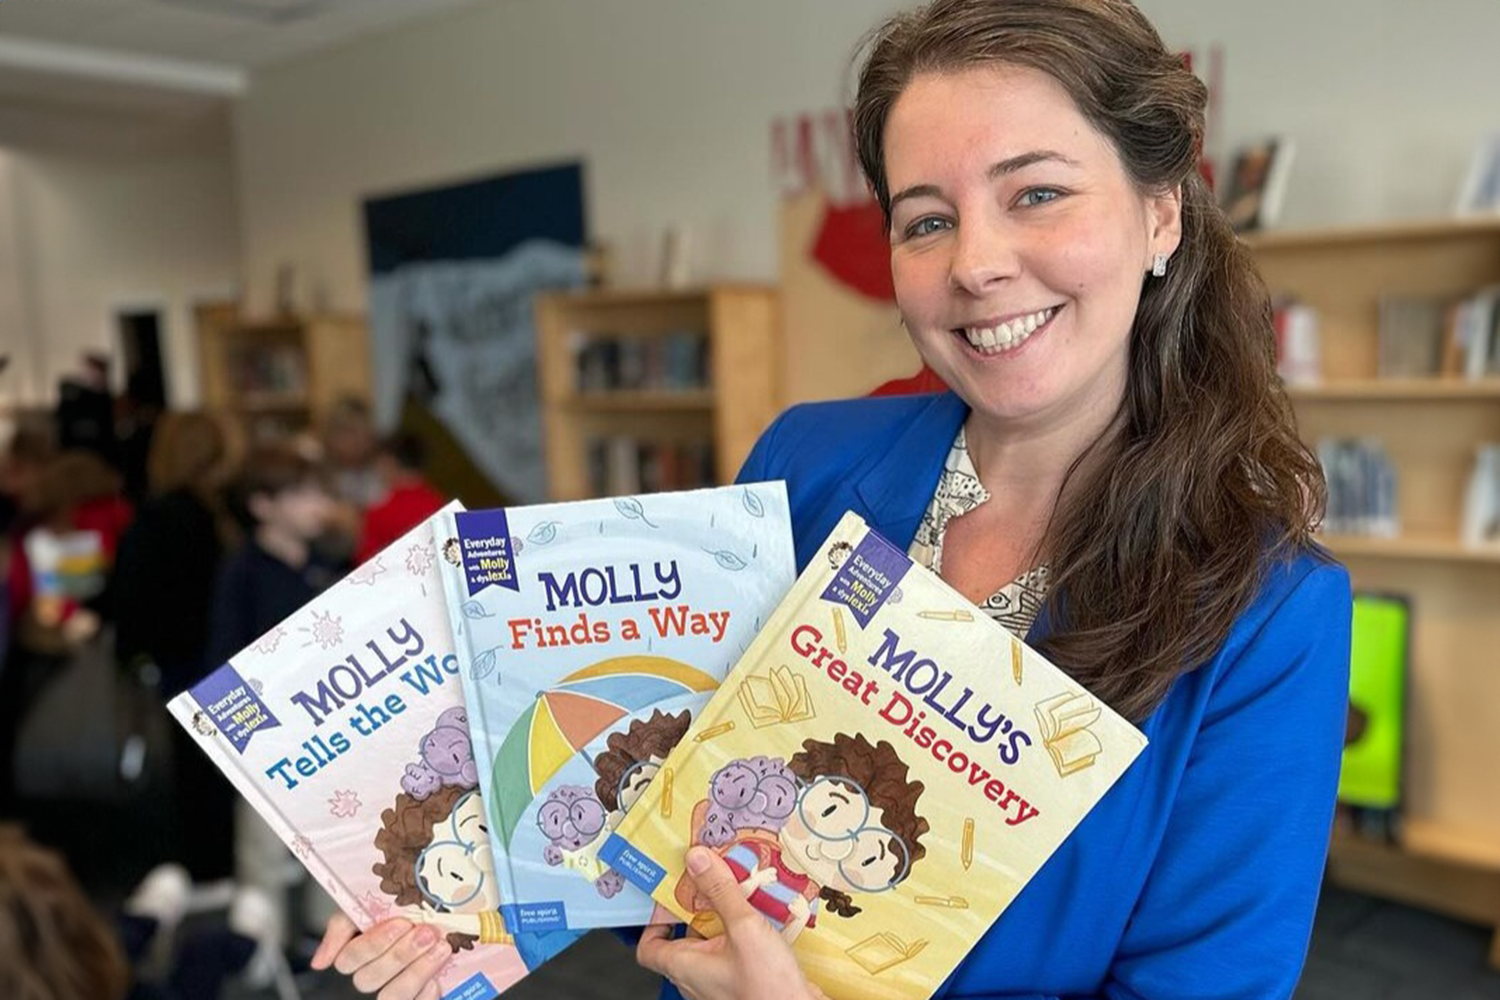 Krista Weltner shares her series of picture book about a girl named Molly